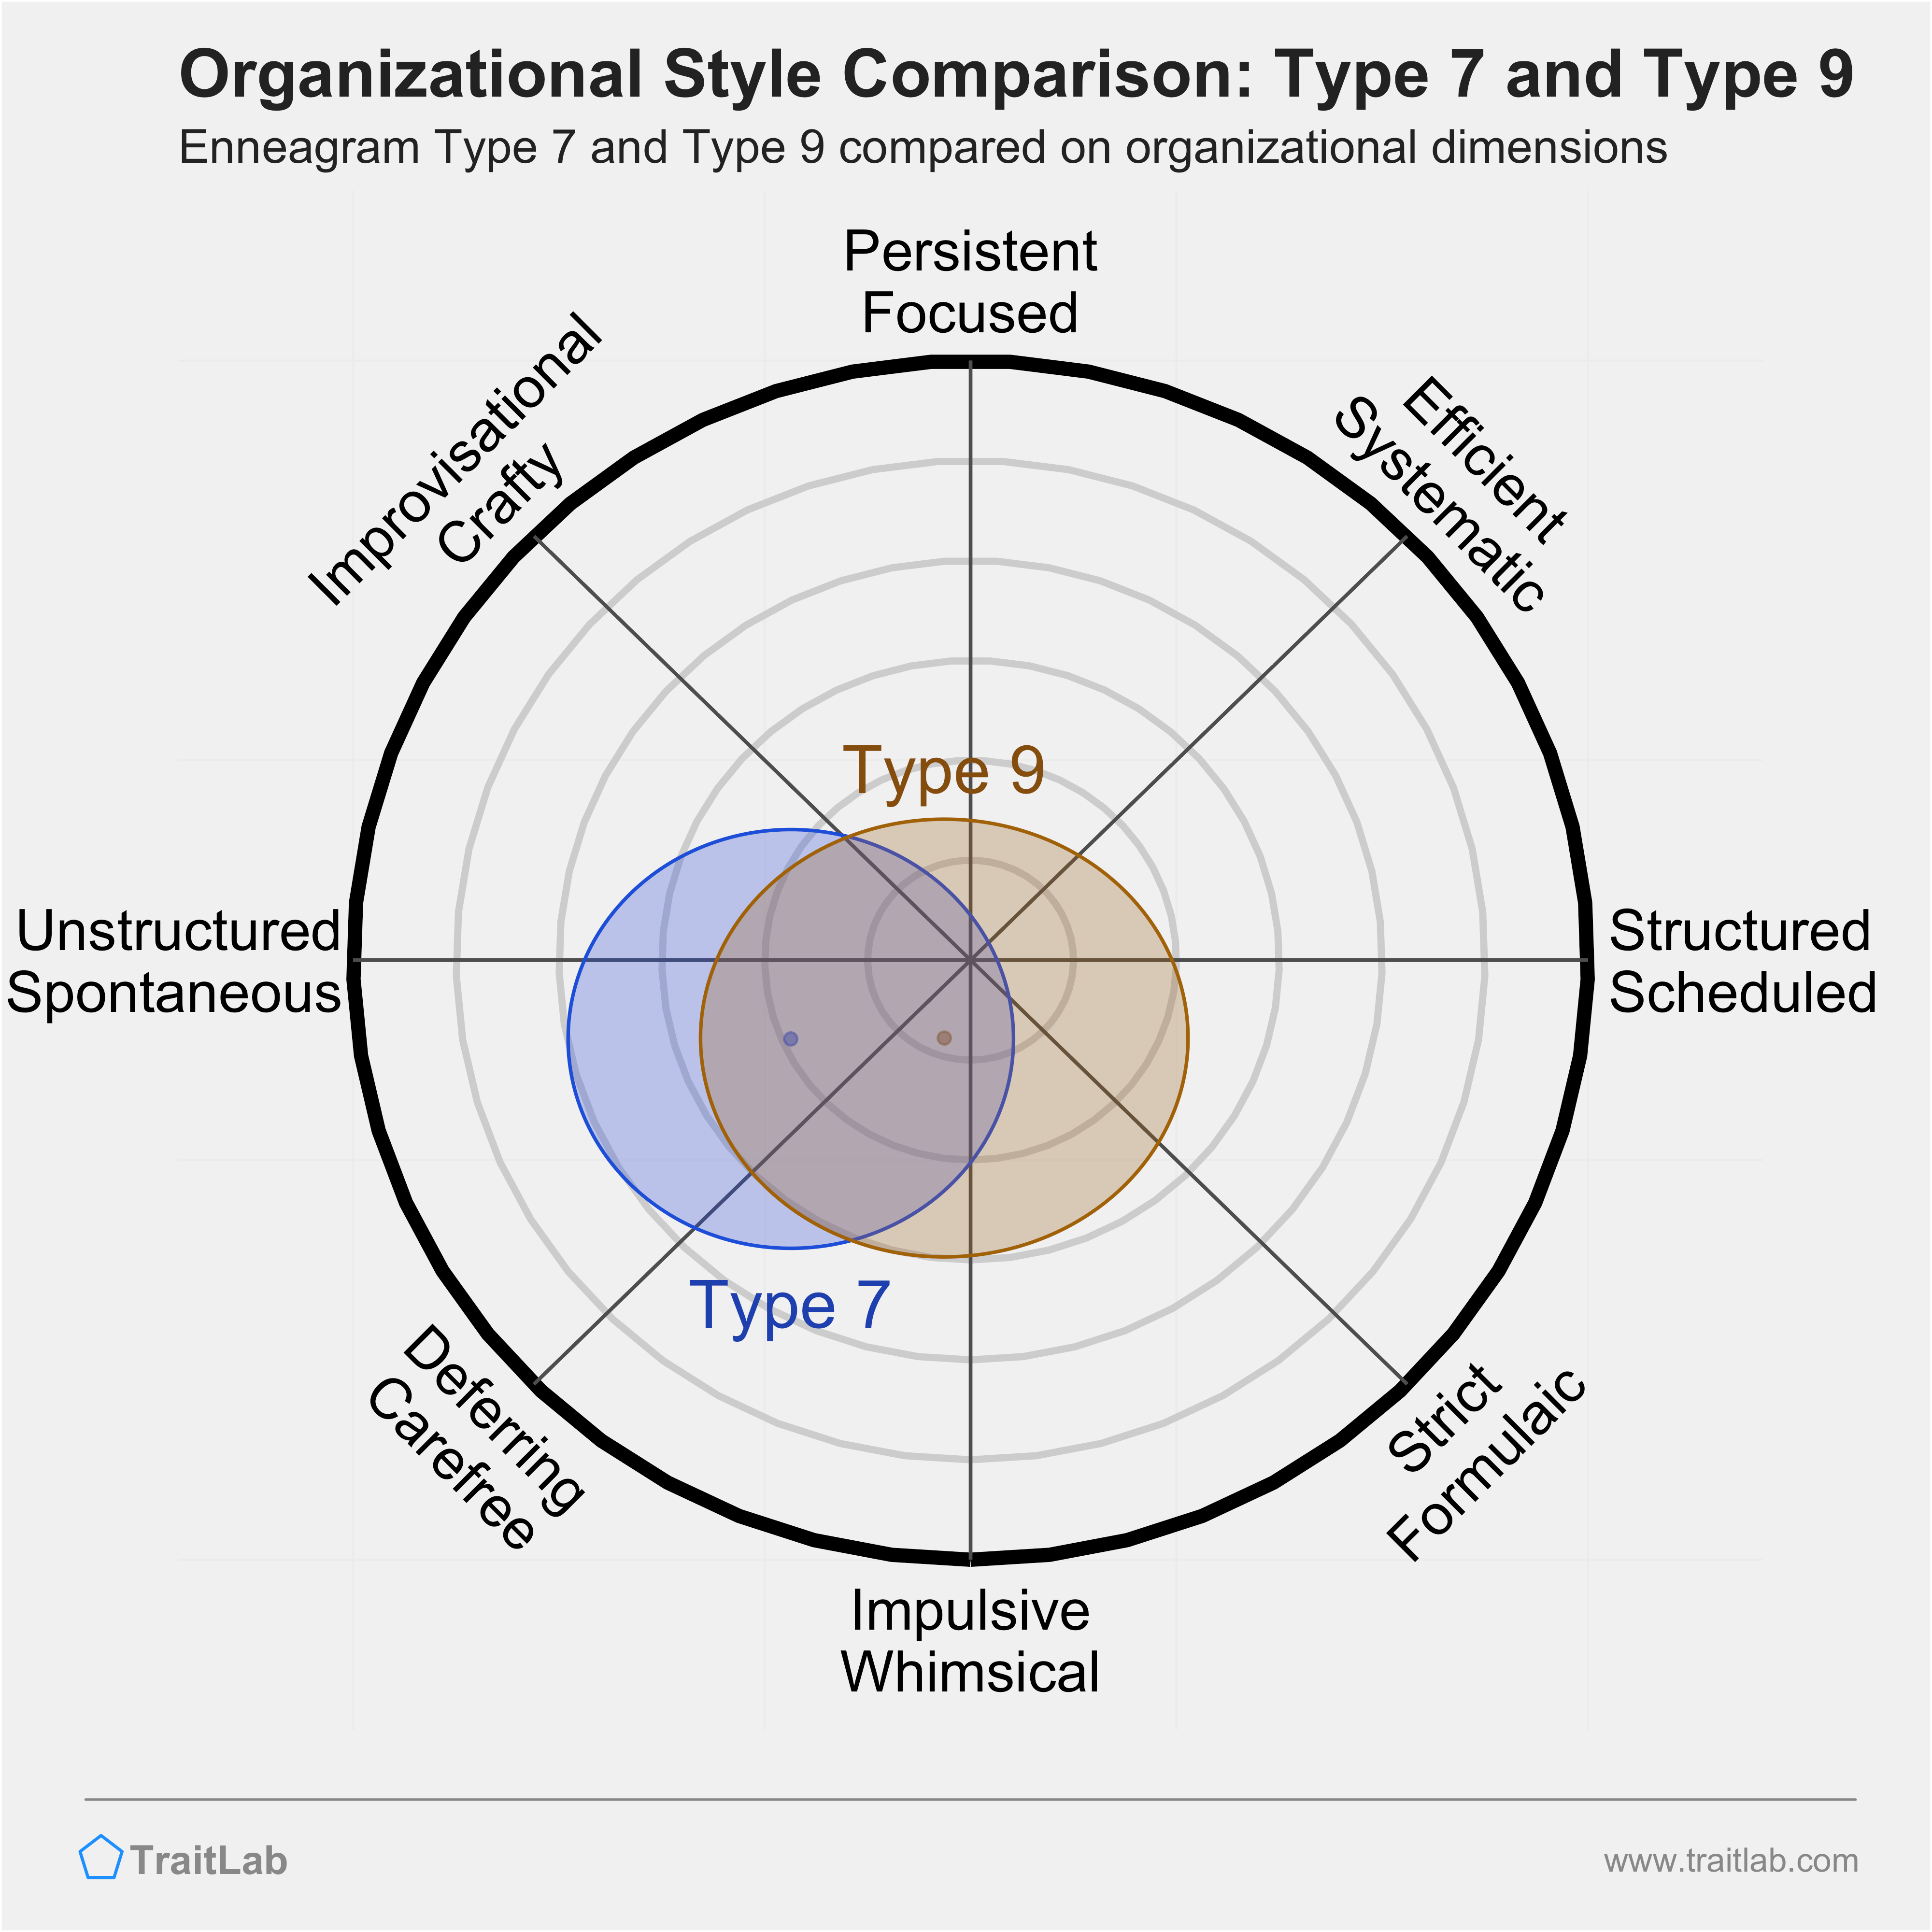 Type 7 and Type 9 comparison across organizational dimensions